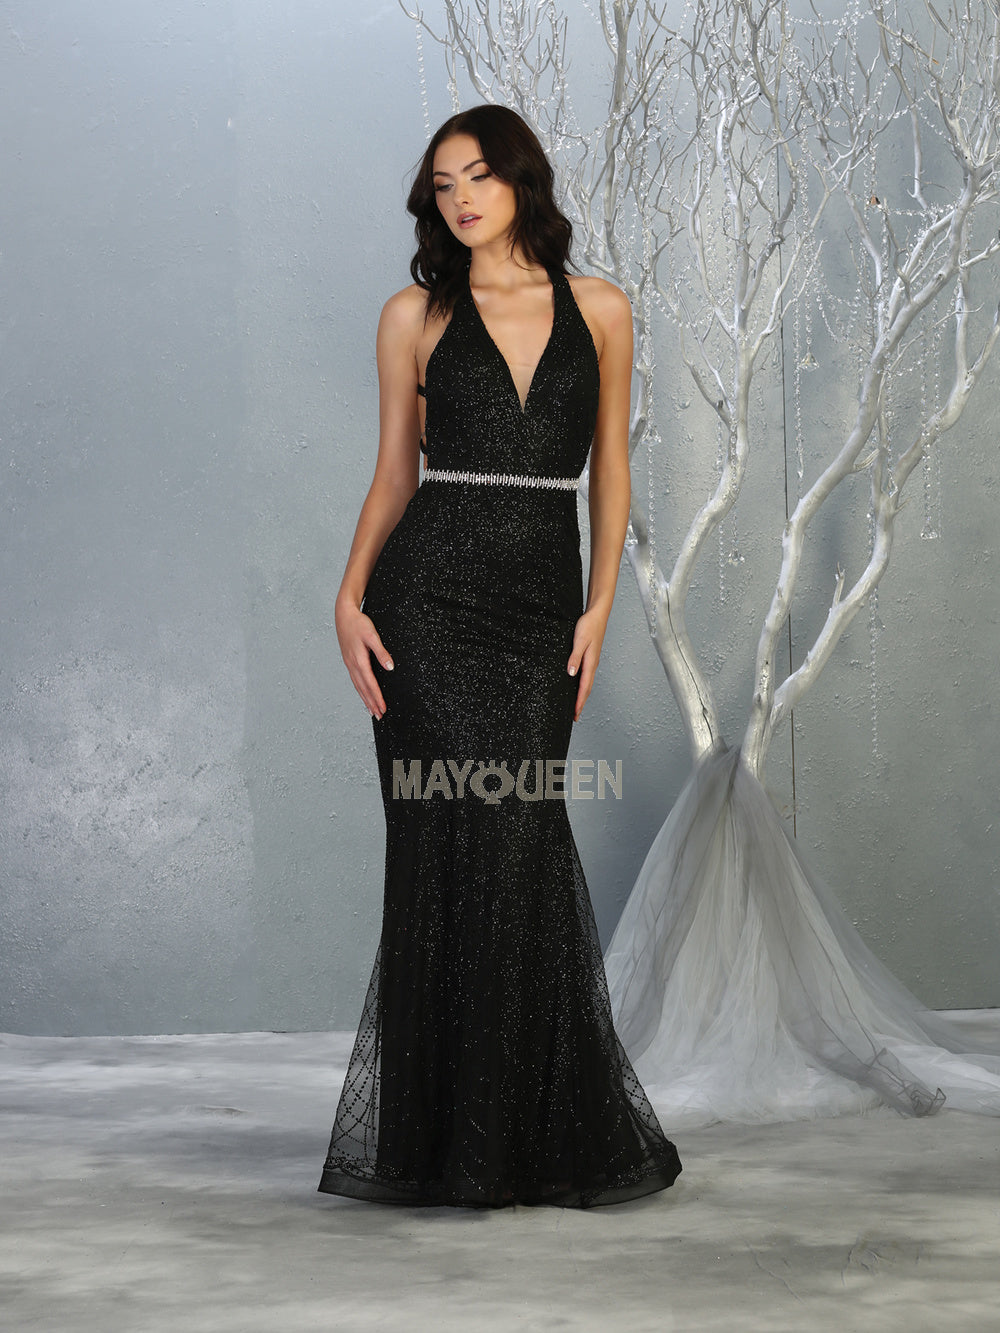 MQ 7797 - Glitter Print Fit & Flare Prom Gown with V-Neck Open Strappy Back & Rhinestone Belt Prom Dress Mayqueen 4 Black 